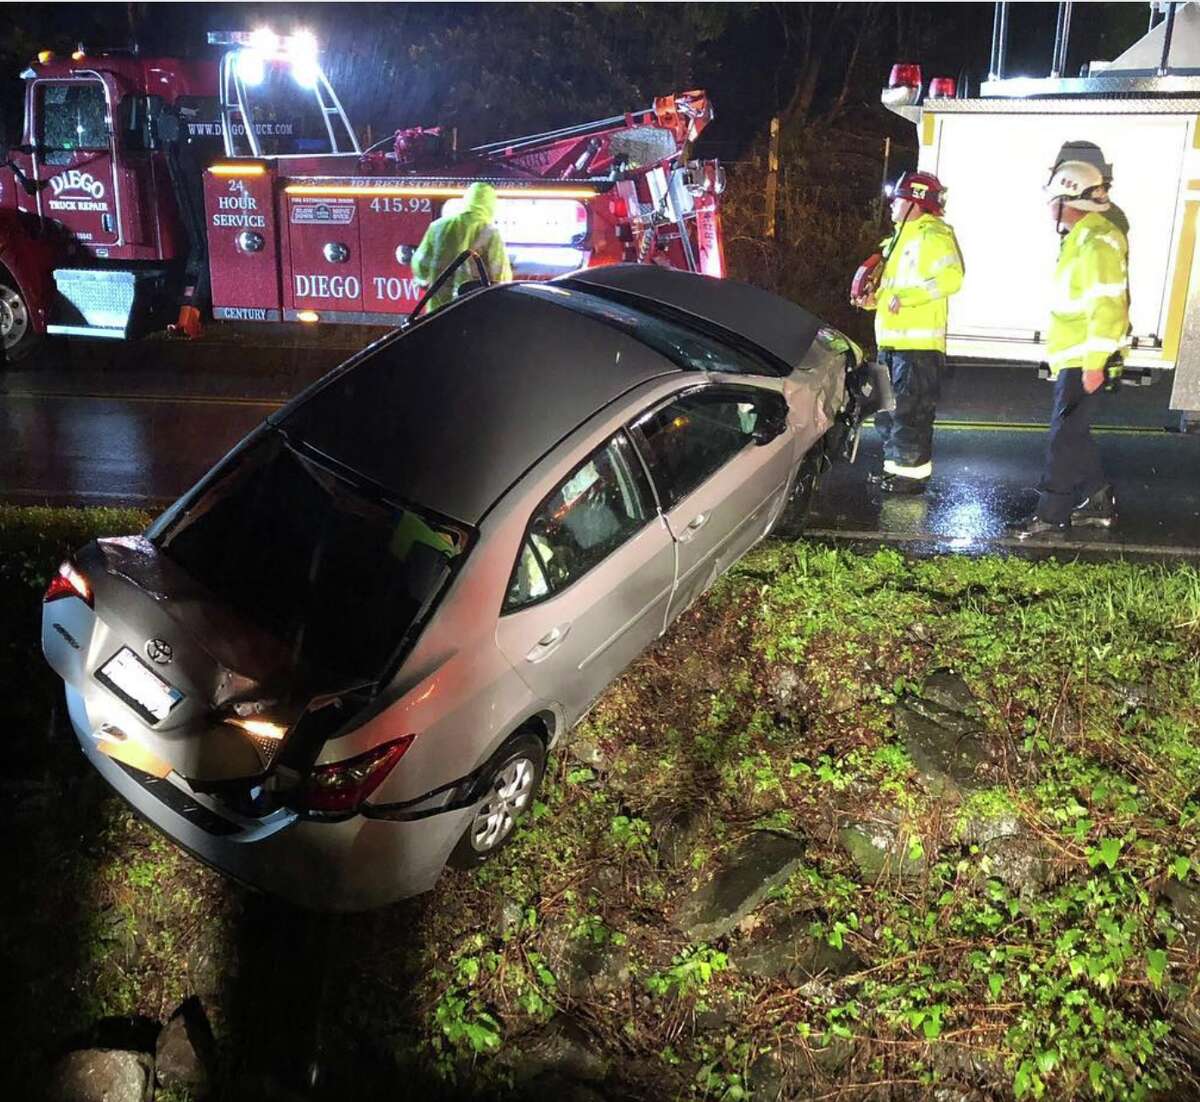 The Marin County Sherriff's Department responded to an overturned vehicle in a ditch off Lucas Valley Road on Feb. 25, 2019